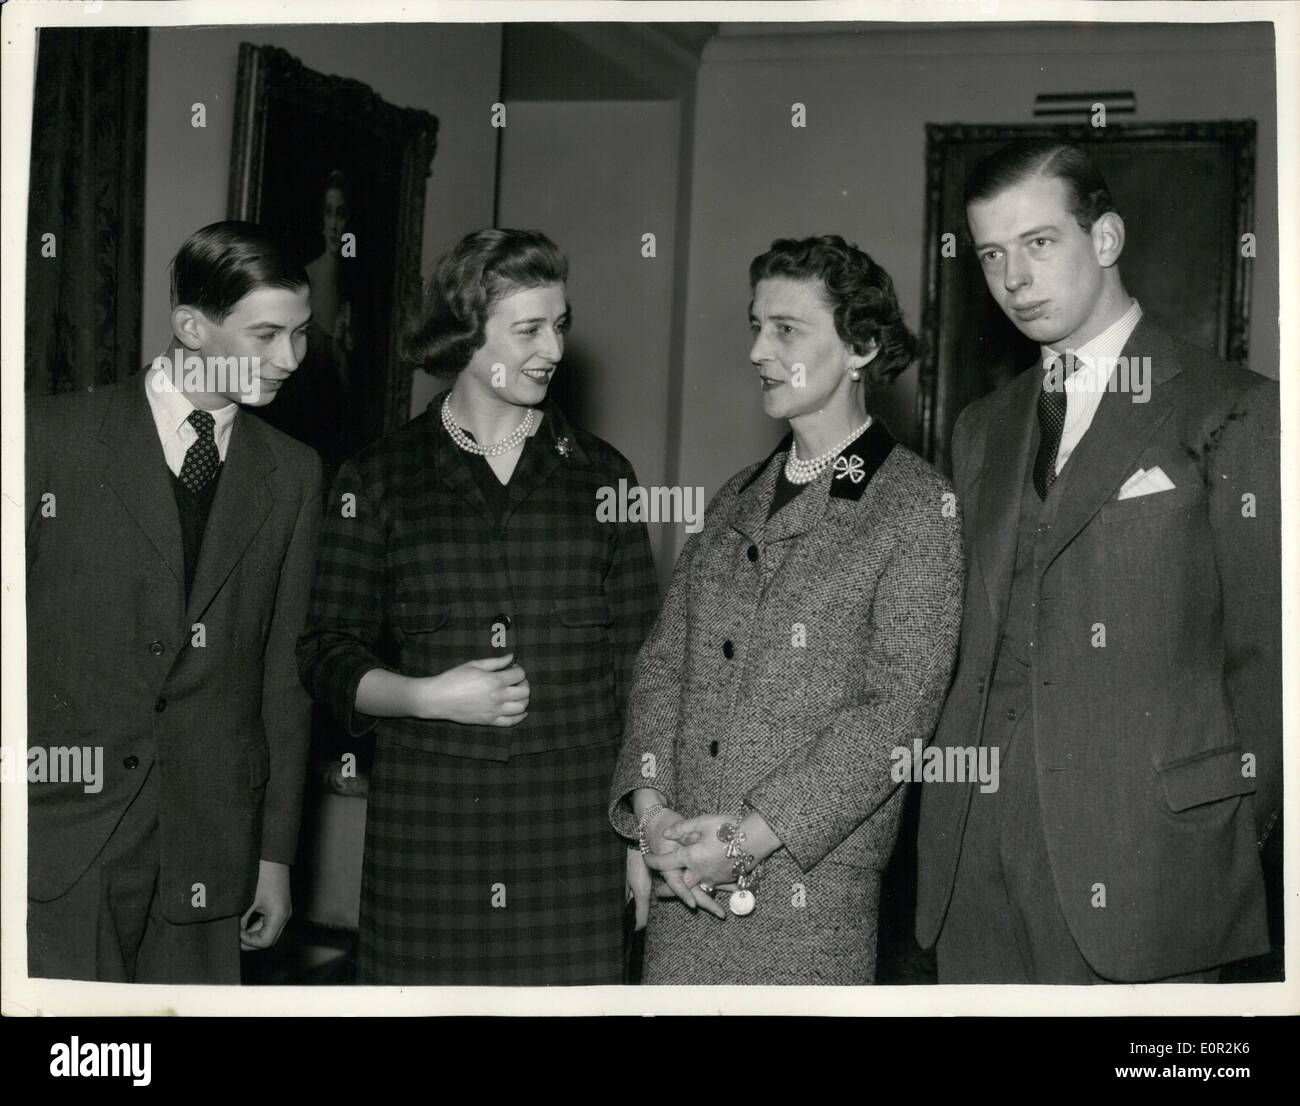 Dec. 12, 1957 - Princess Alexandra 21 On Christmas Day.: Princess Alexandra Of Kent Is Shown With Her Mother, The Duchess Of Kent, And Her Brothers. The Duke Of Kent (Right), 22, And Prince Michael, 15, At Kensington Palace, London, Yesterday (Dec. 18th). The Picture Was Made In Convection With The Princess' 21st. Birthday, Which She Celebrates On December 25. Stock Photo